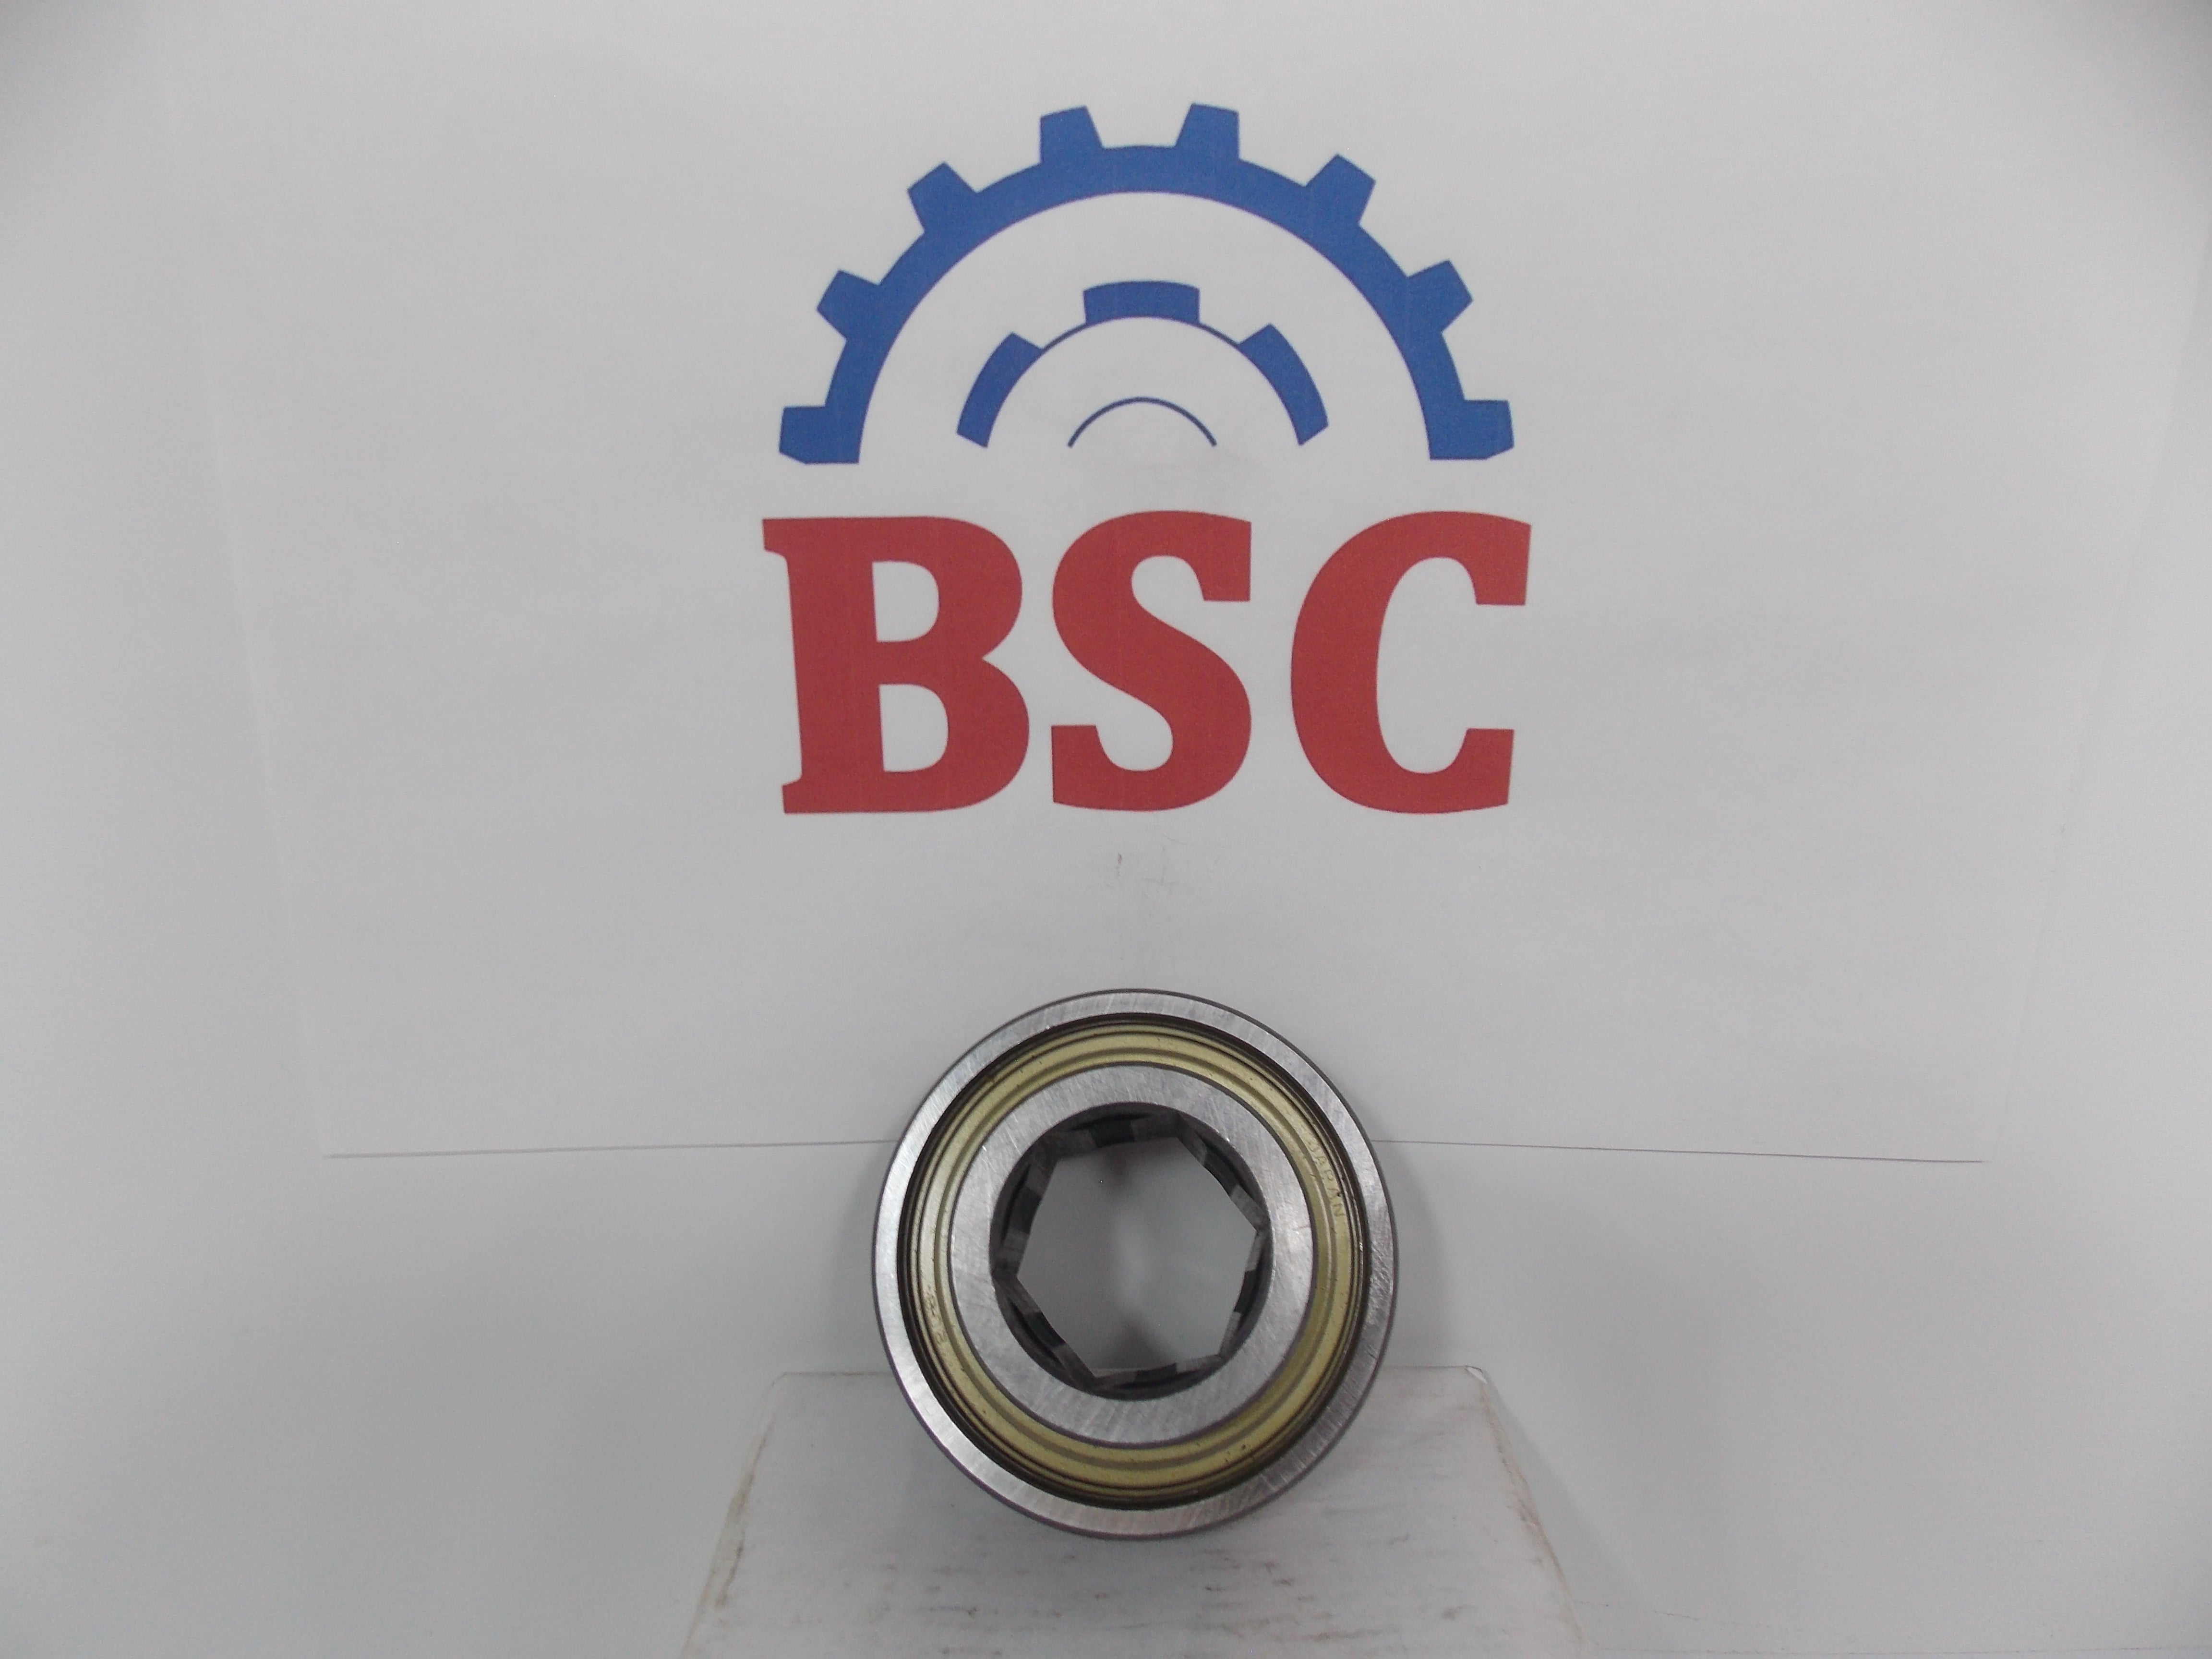 206KRRB6 Special AG Bearing Hex Bore